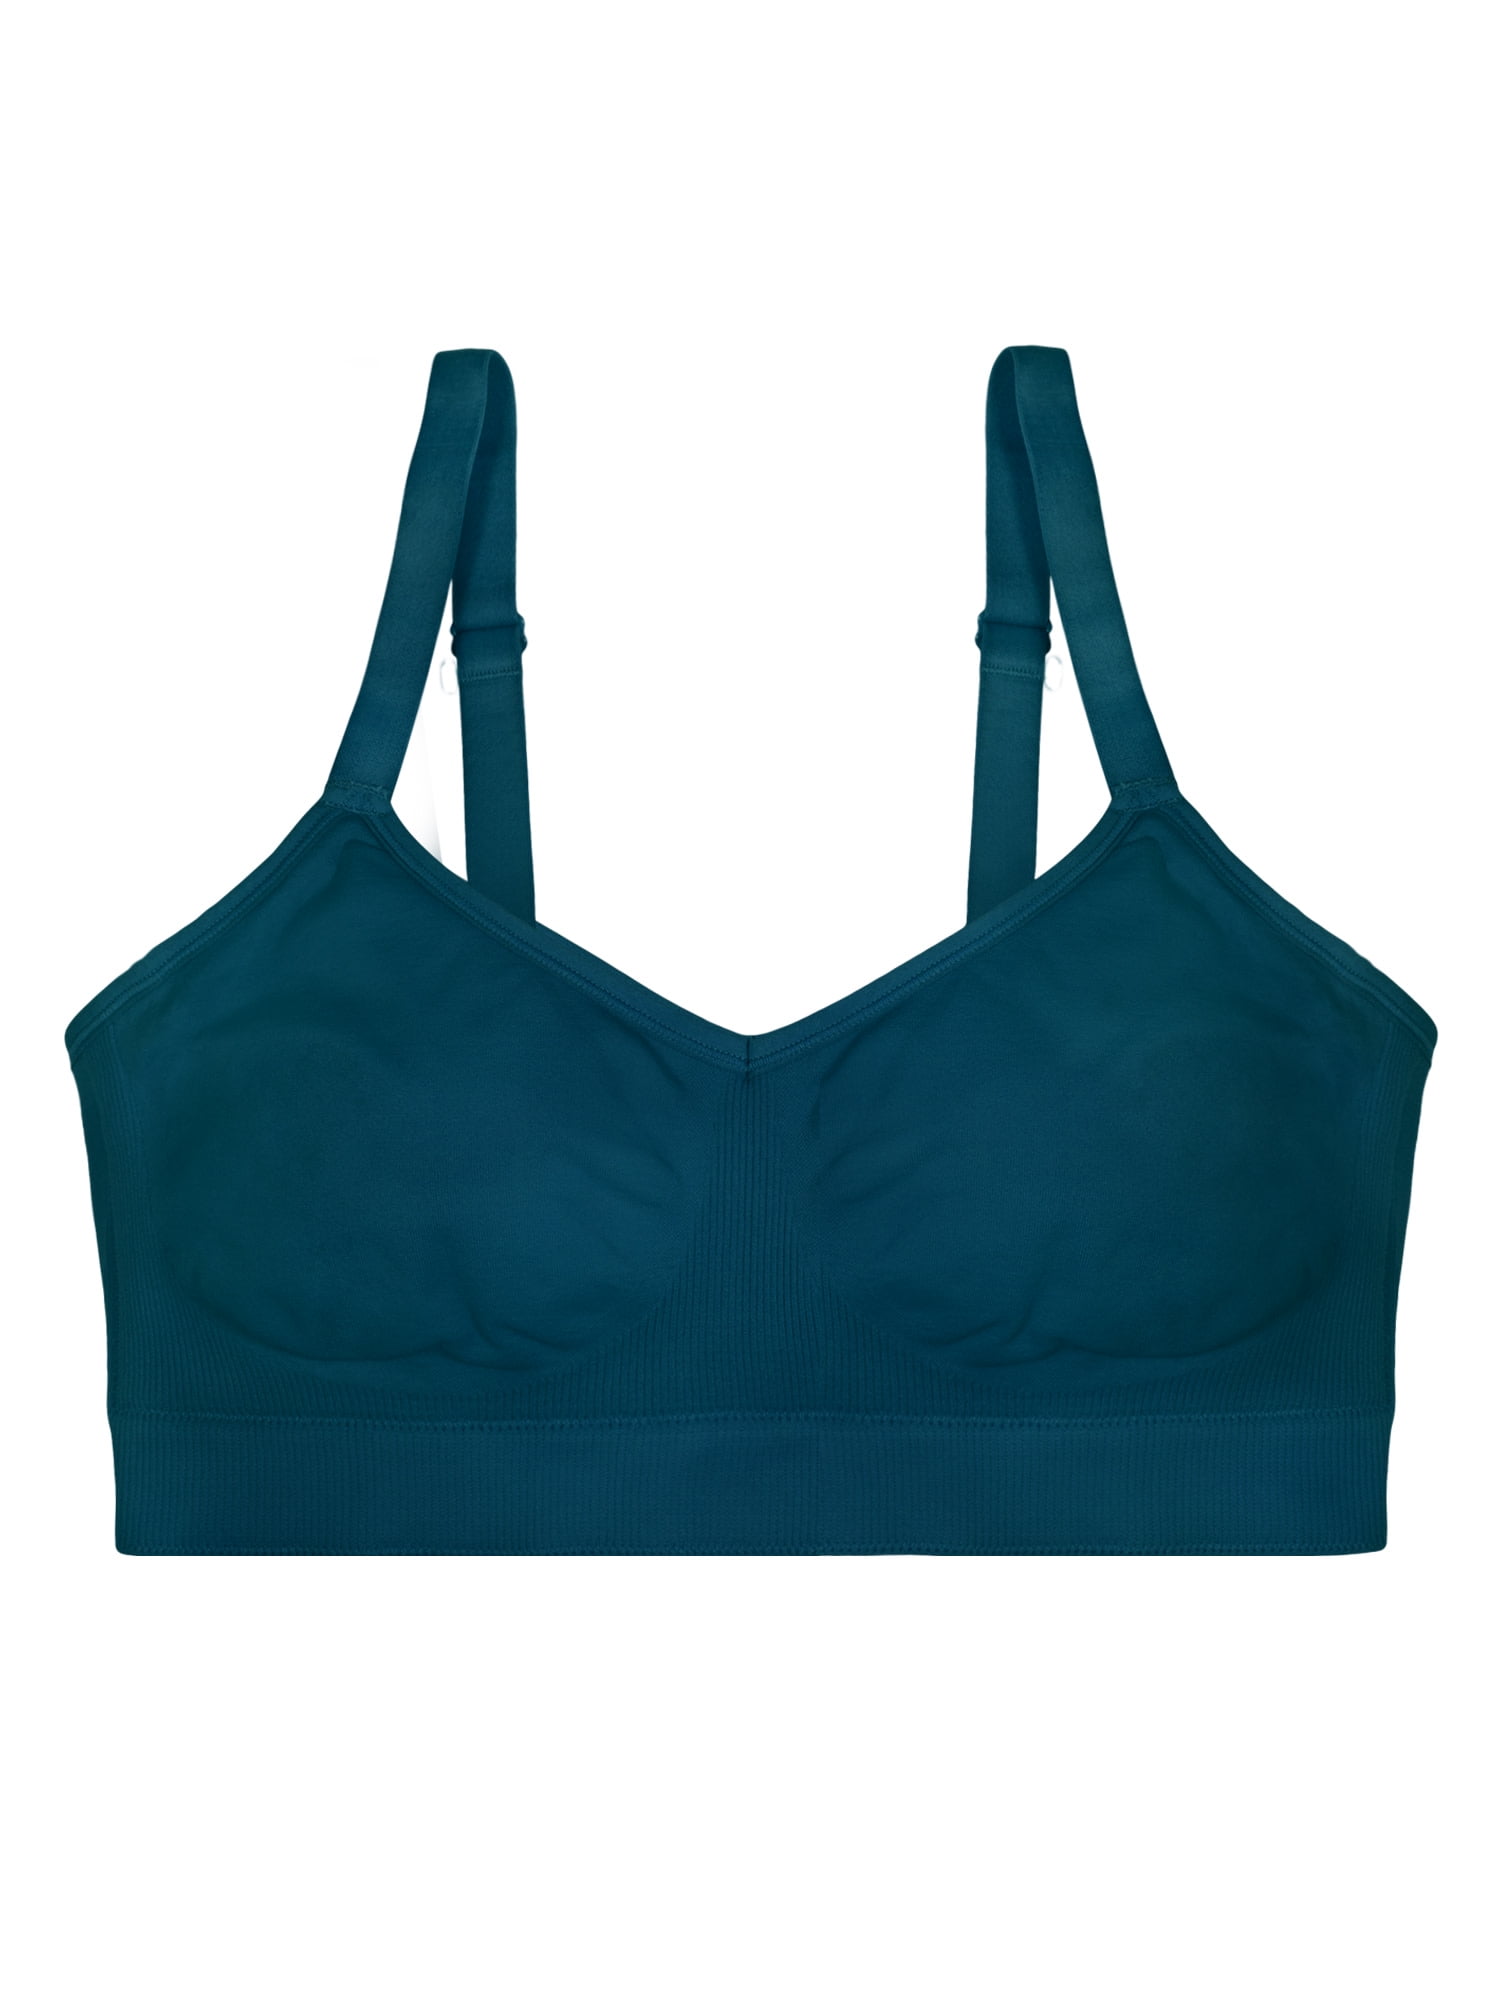 AnyBody Set of 2 Rib Knit Seamless Bras-Blk/Lt Turquoise-Large-A393149